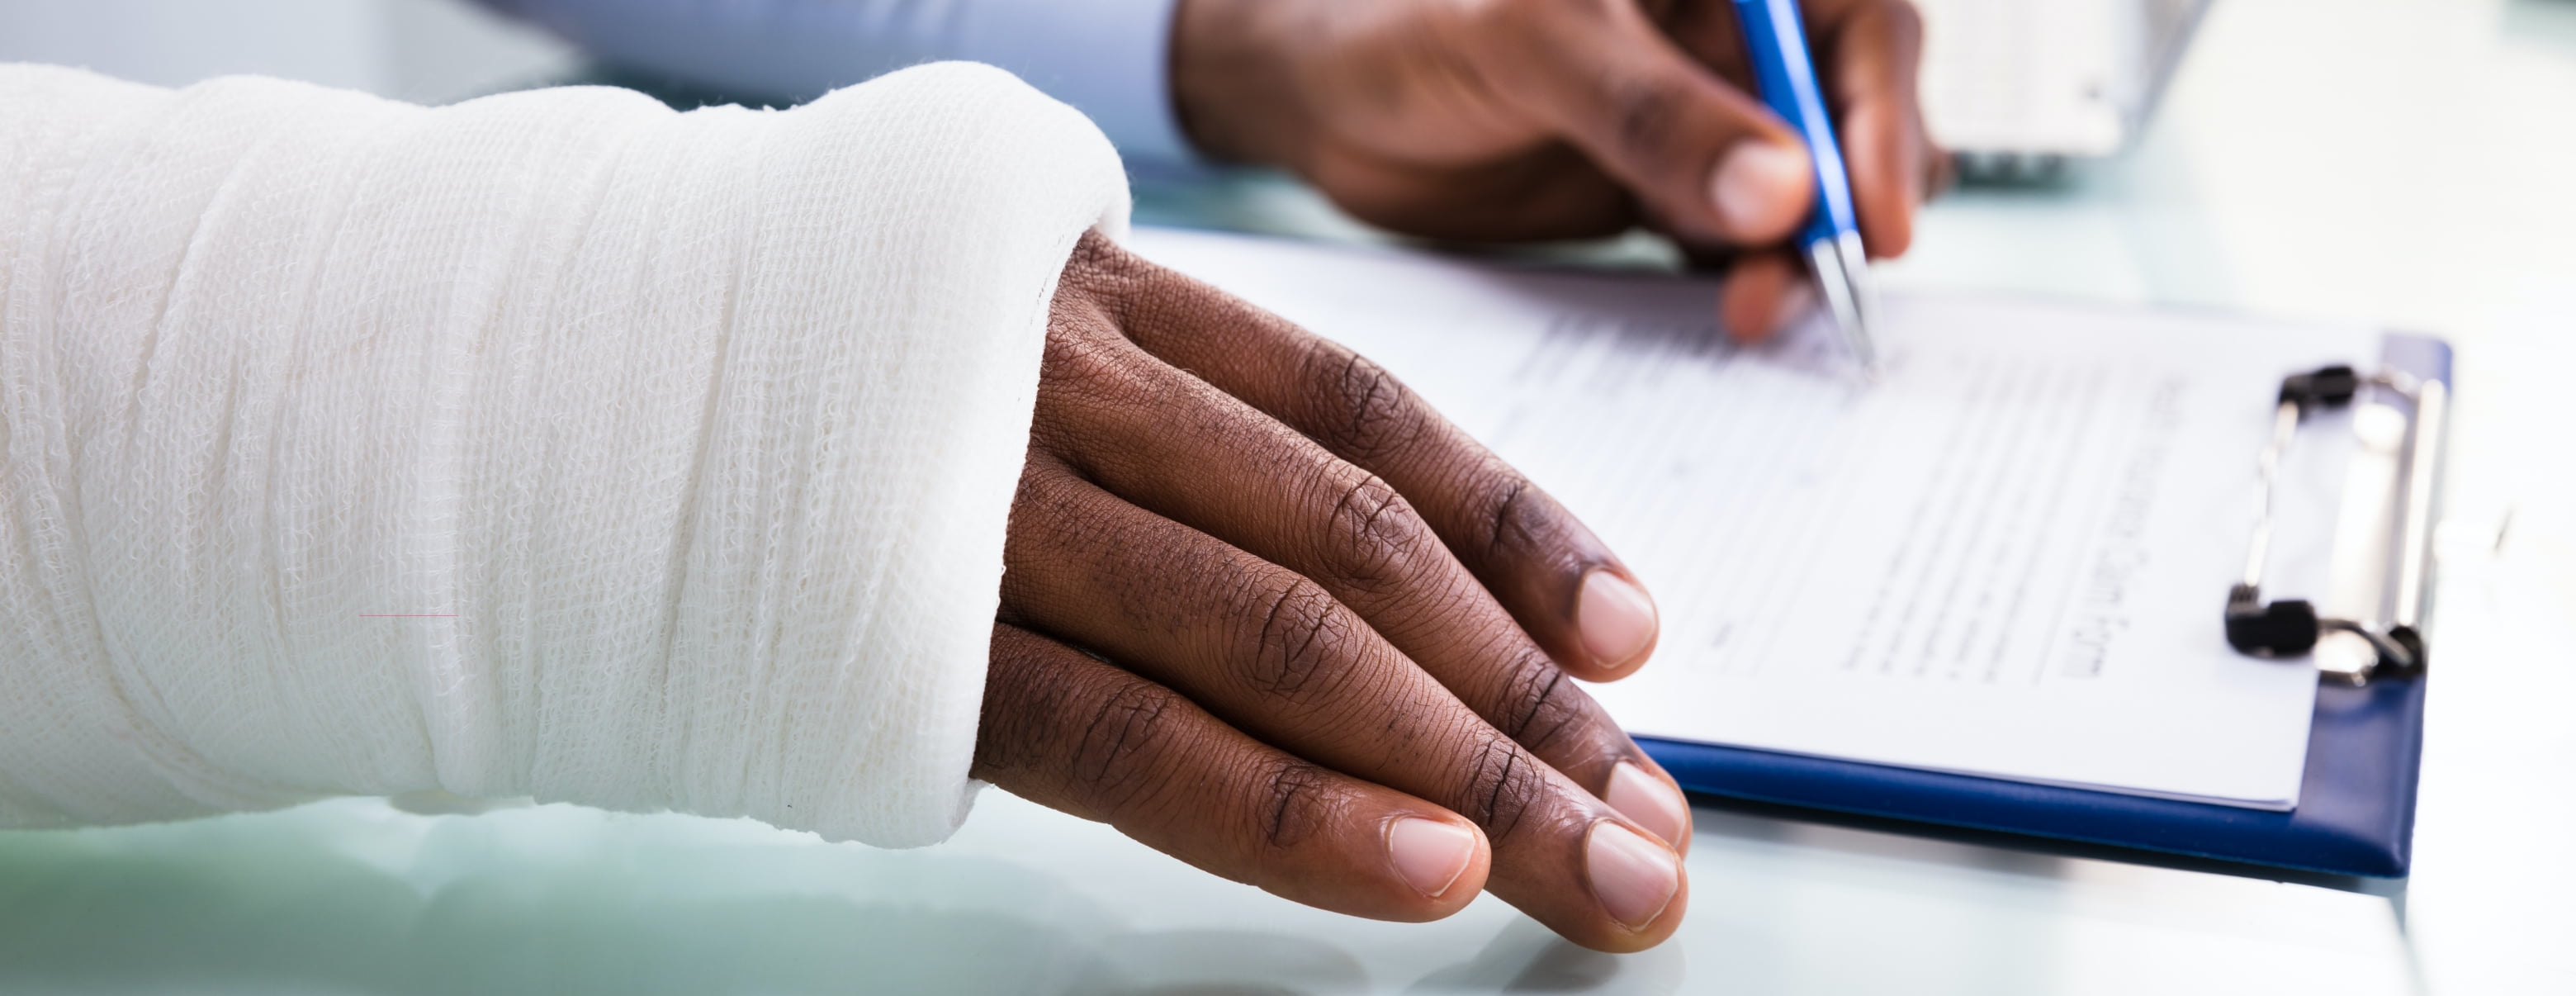 Injured employee with hand in cast - workers' compensation California